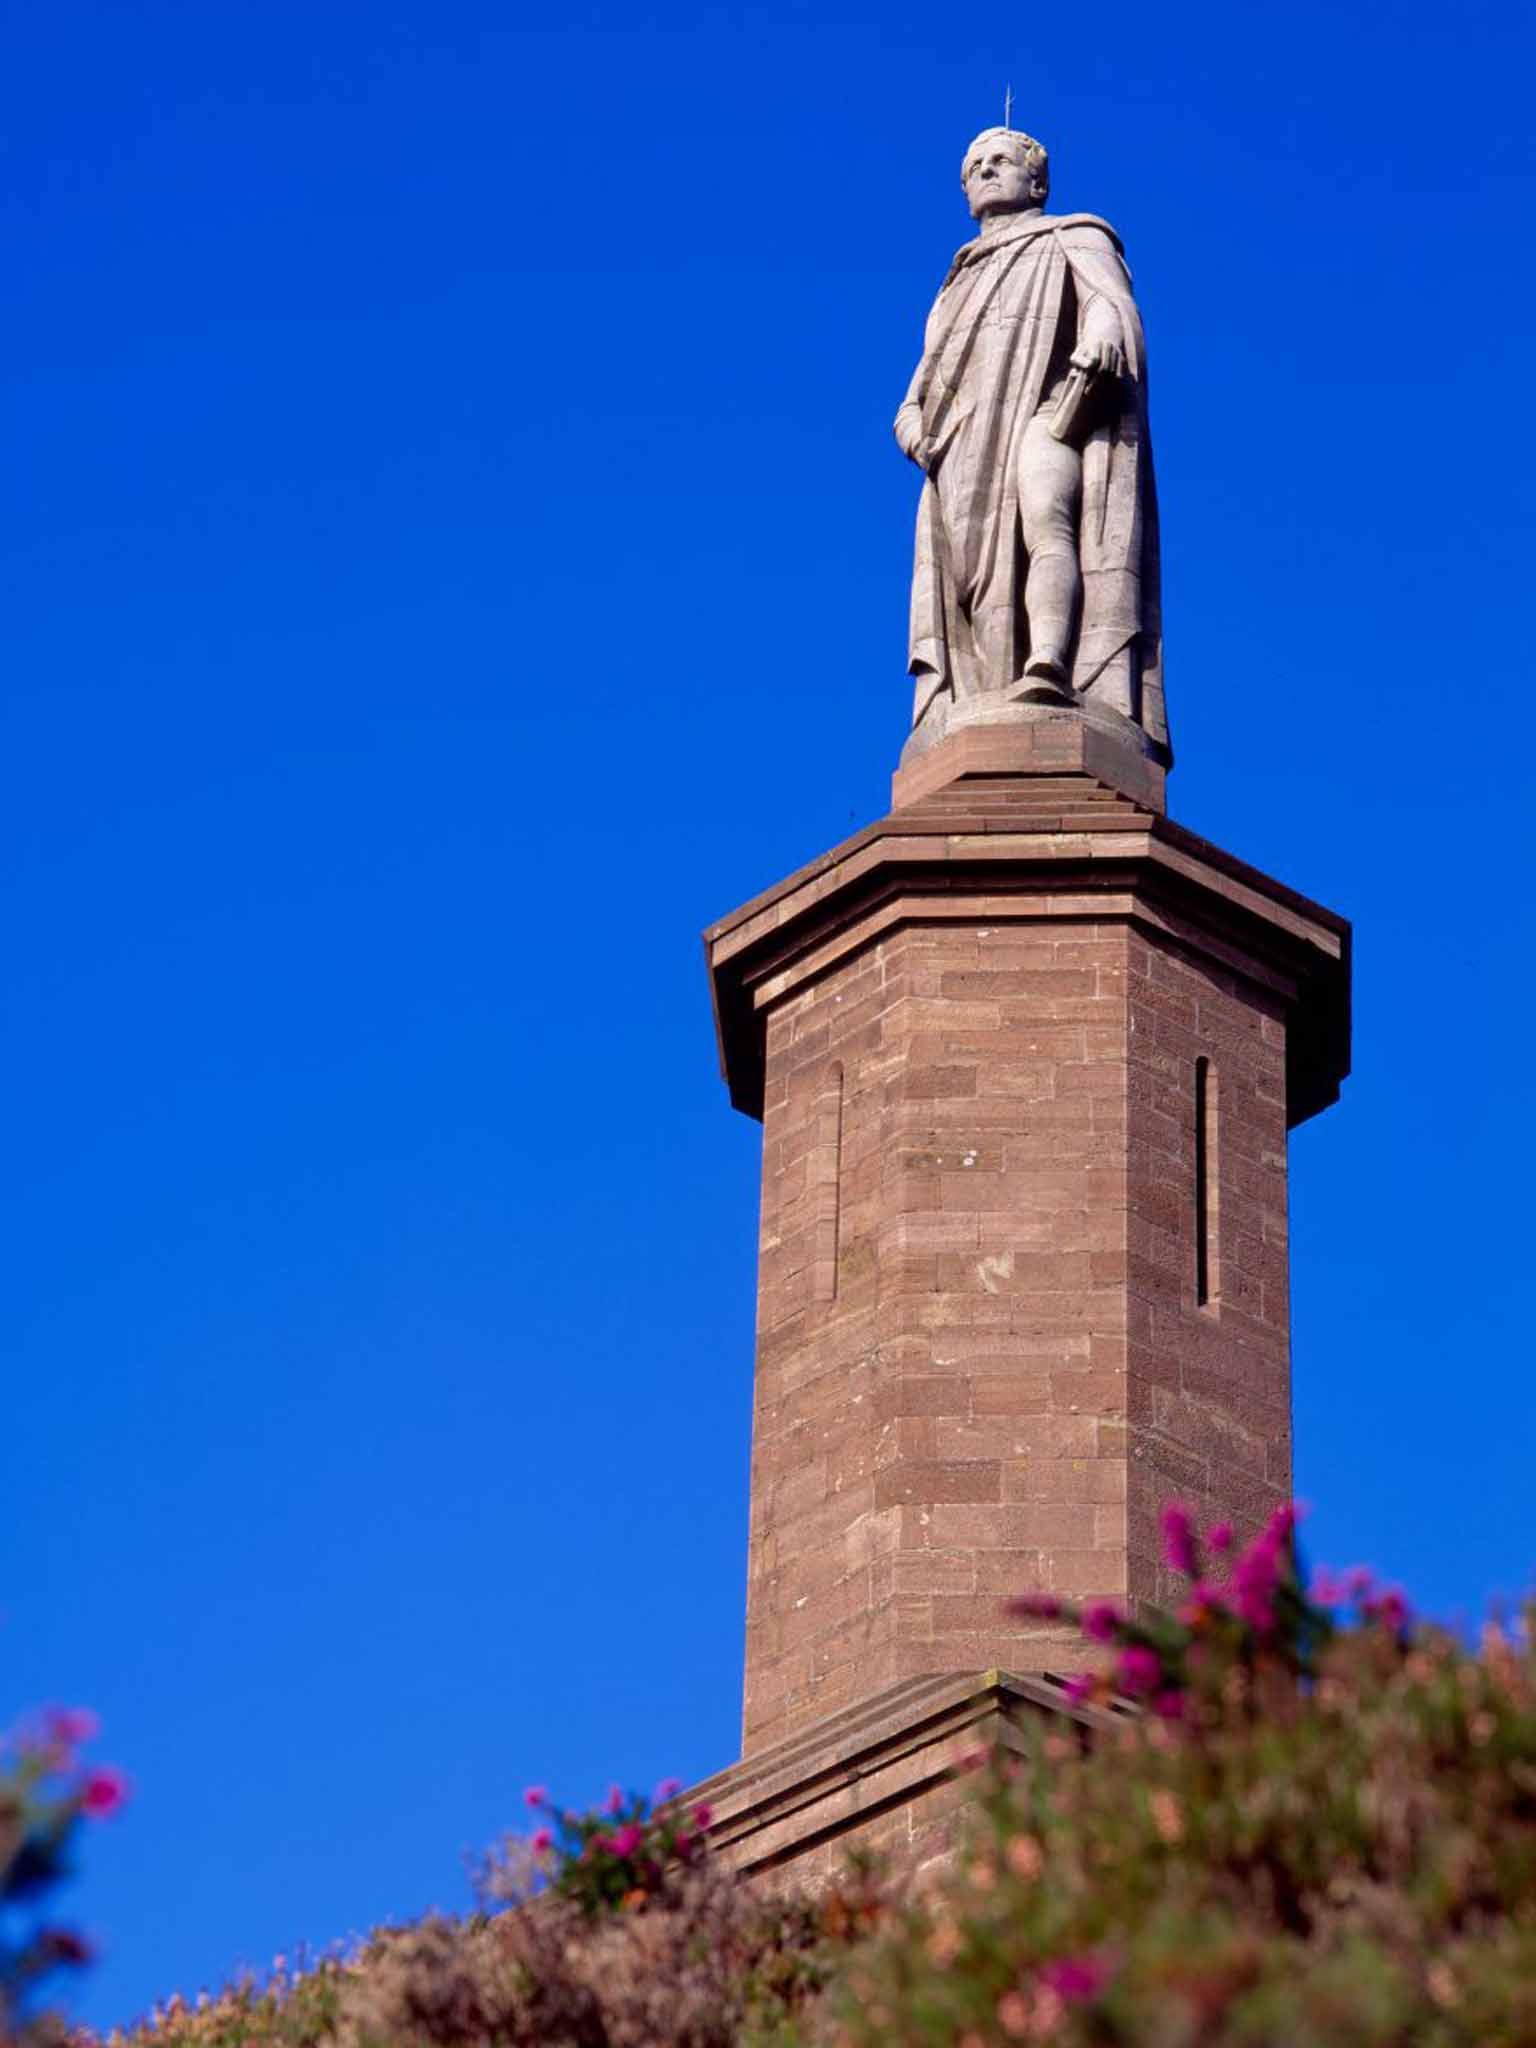 The statue of the First Duke of Sutherland